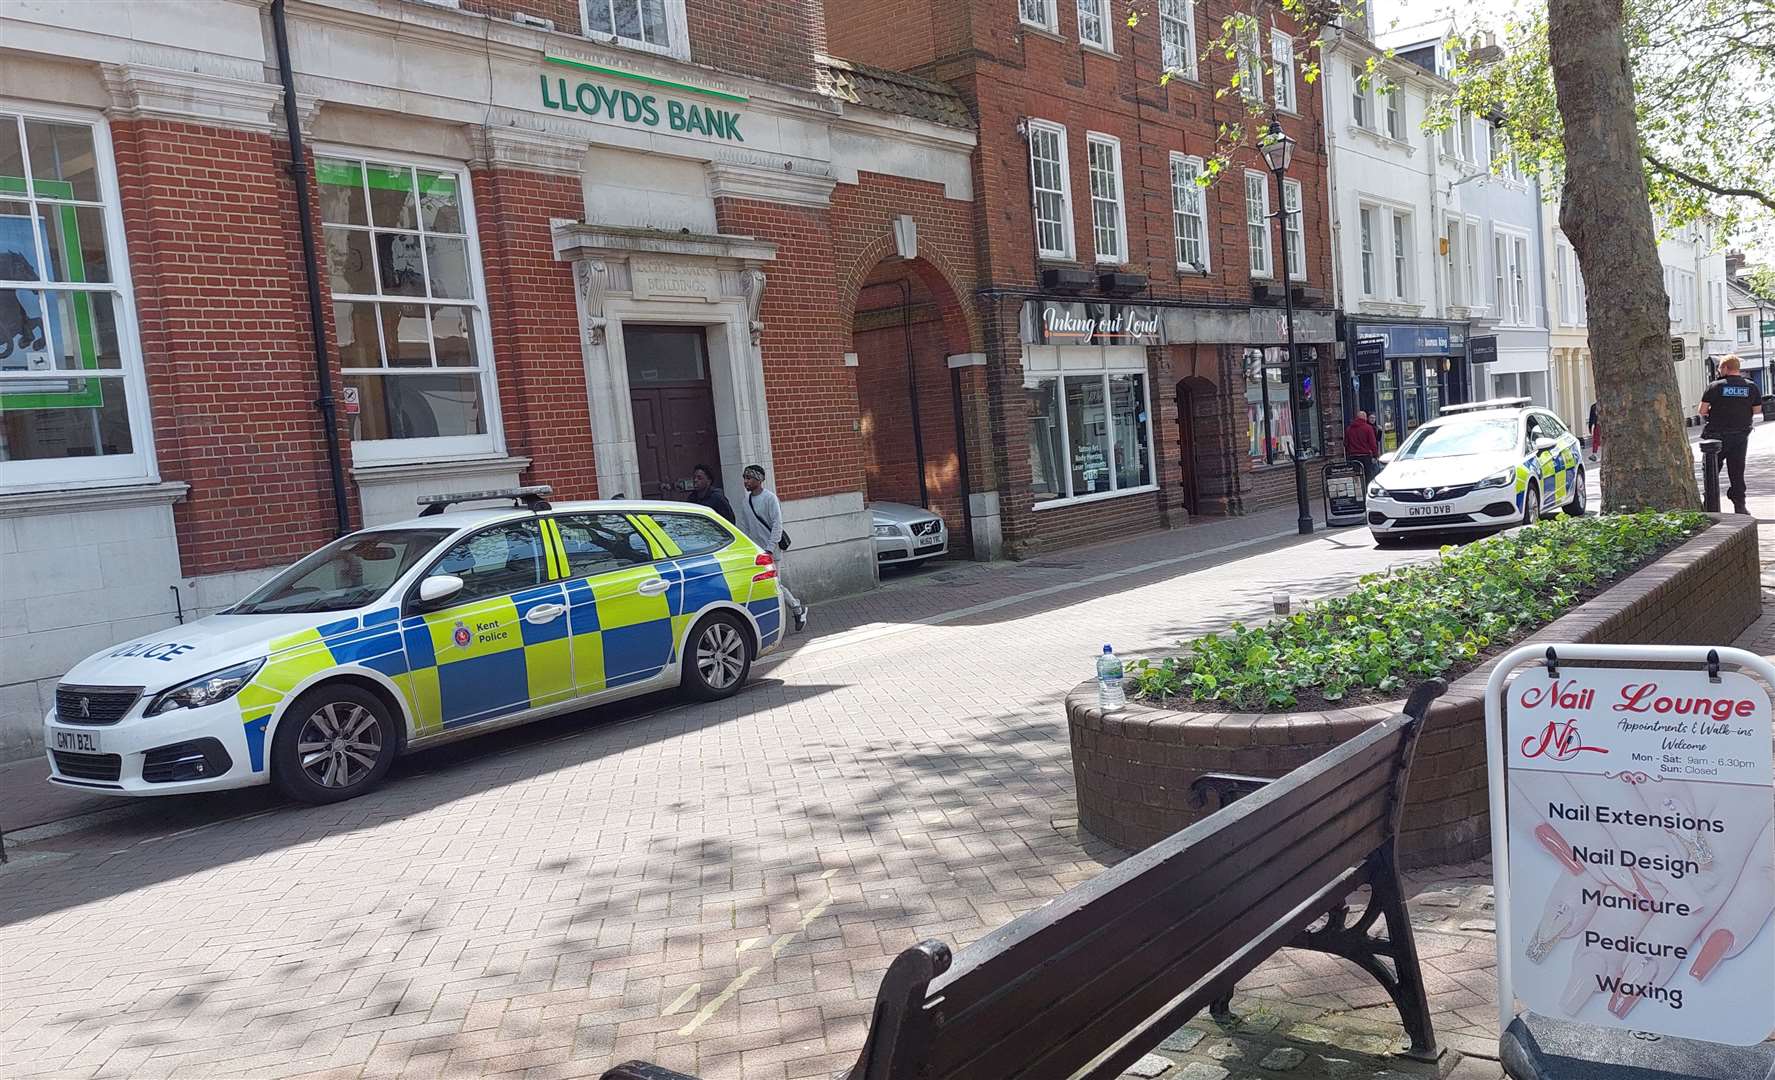 An ambulance was spotted outside Boots in Ashford High Street